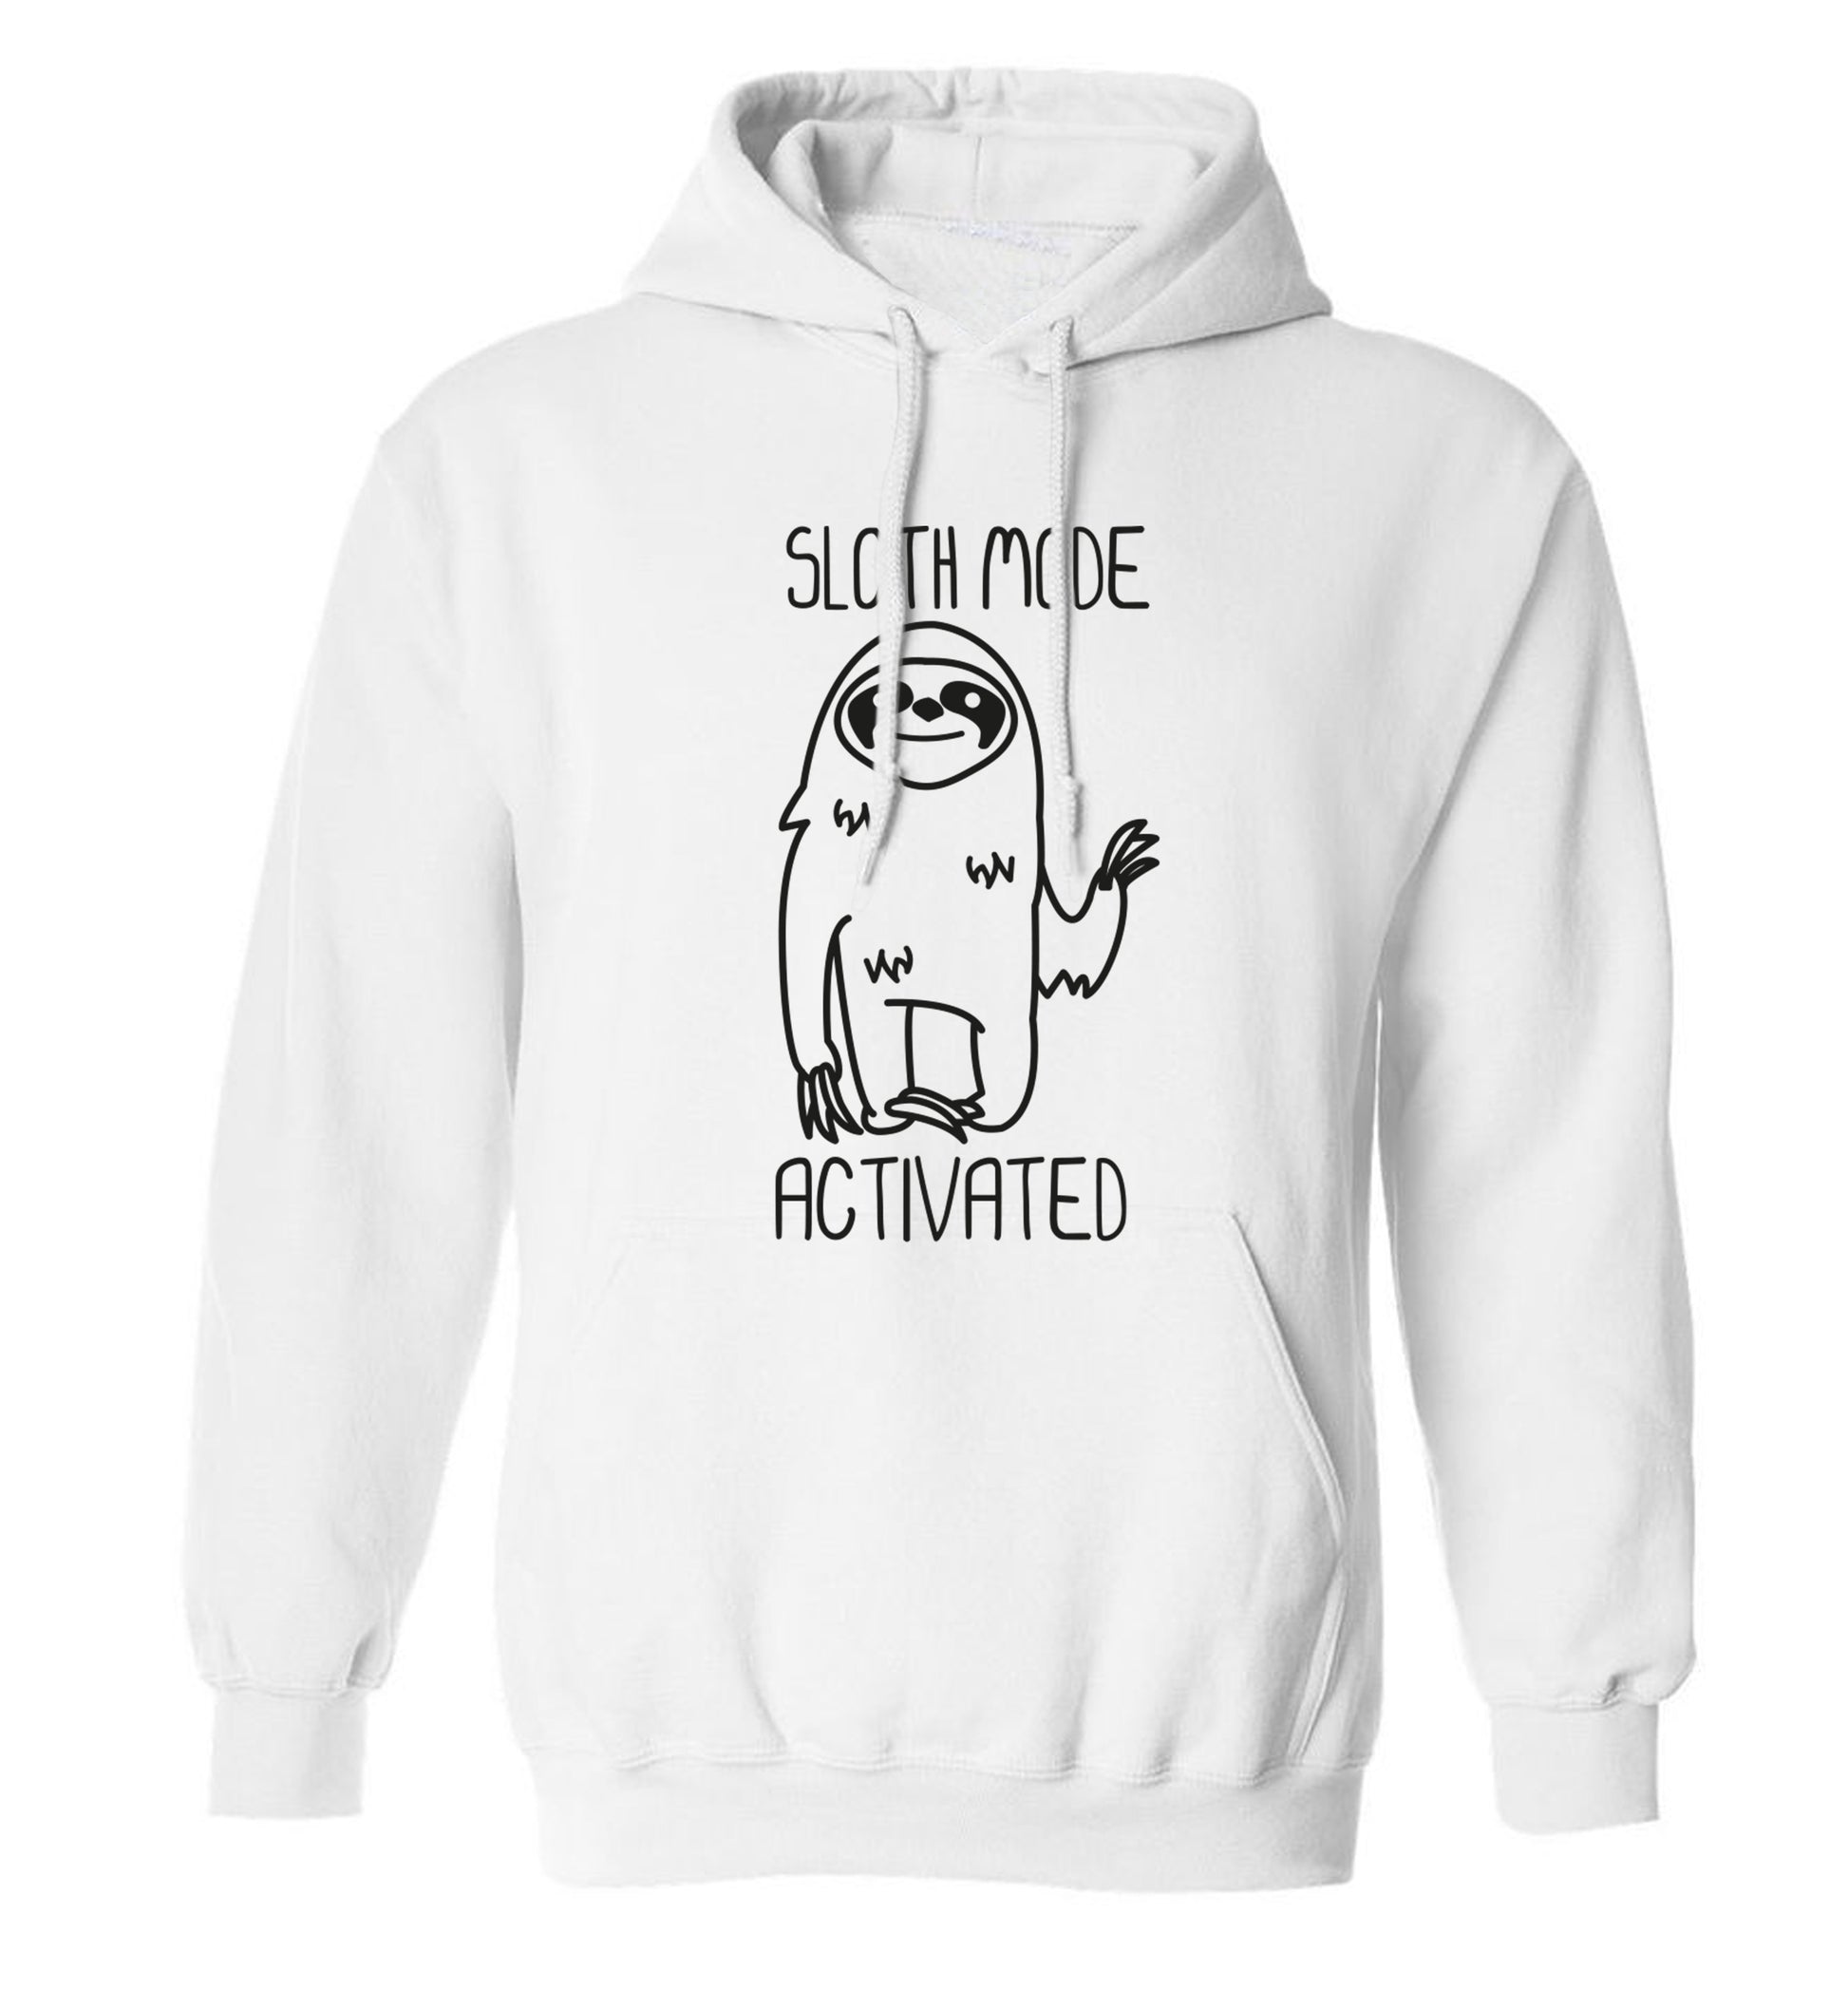 Sloth mode acitvated adults unisex white hoodie 2XL